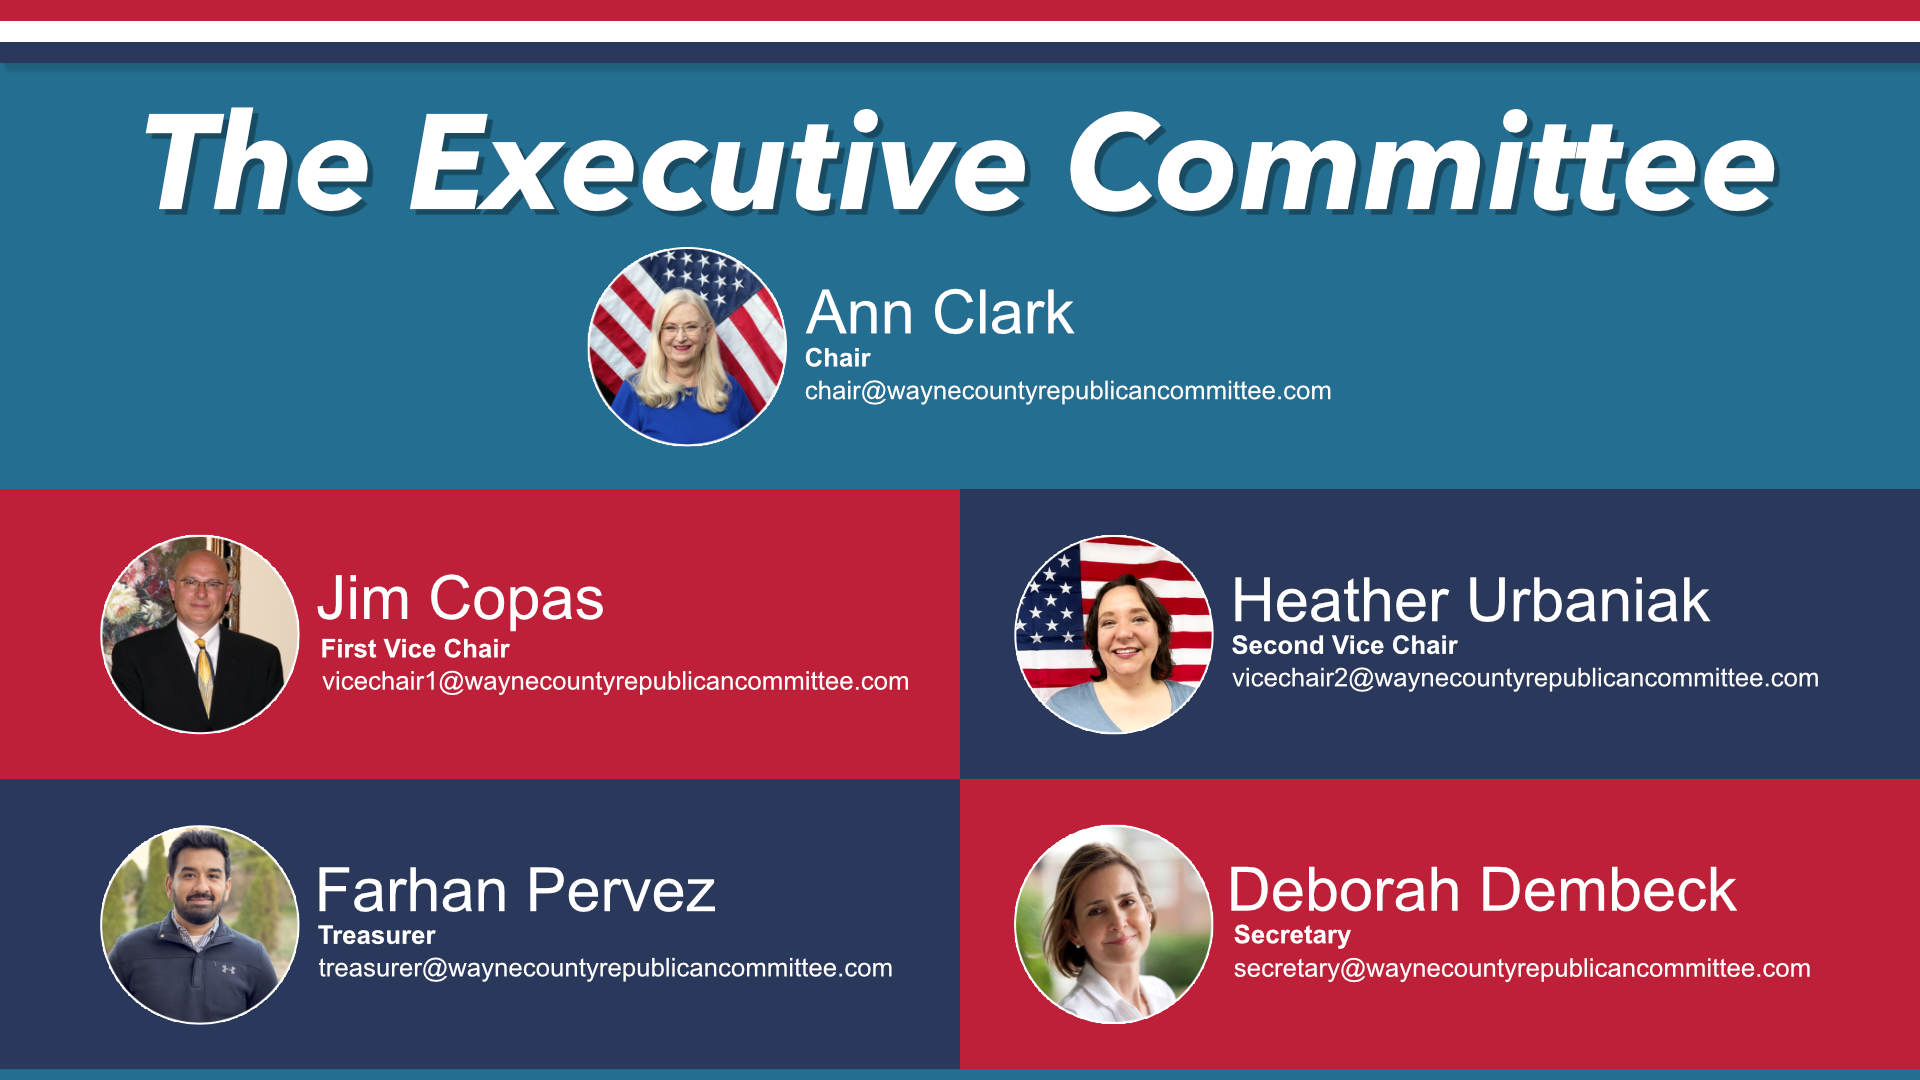 Meet the Executive Committee